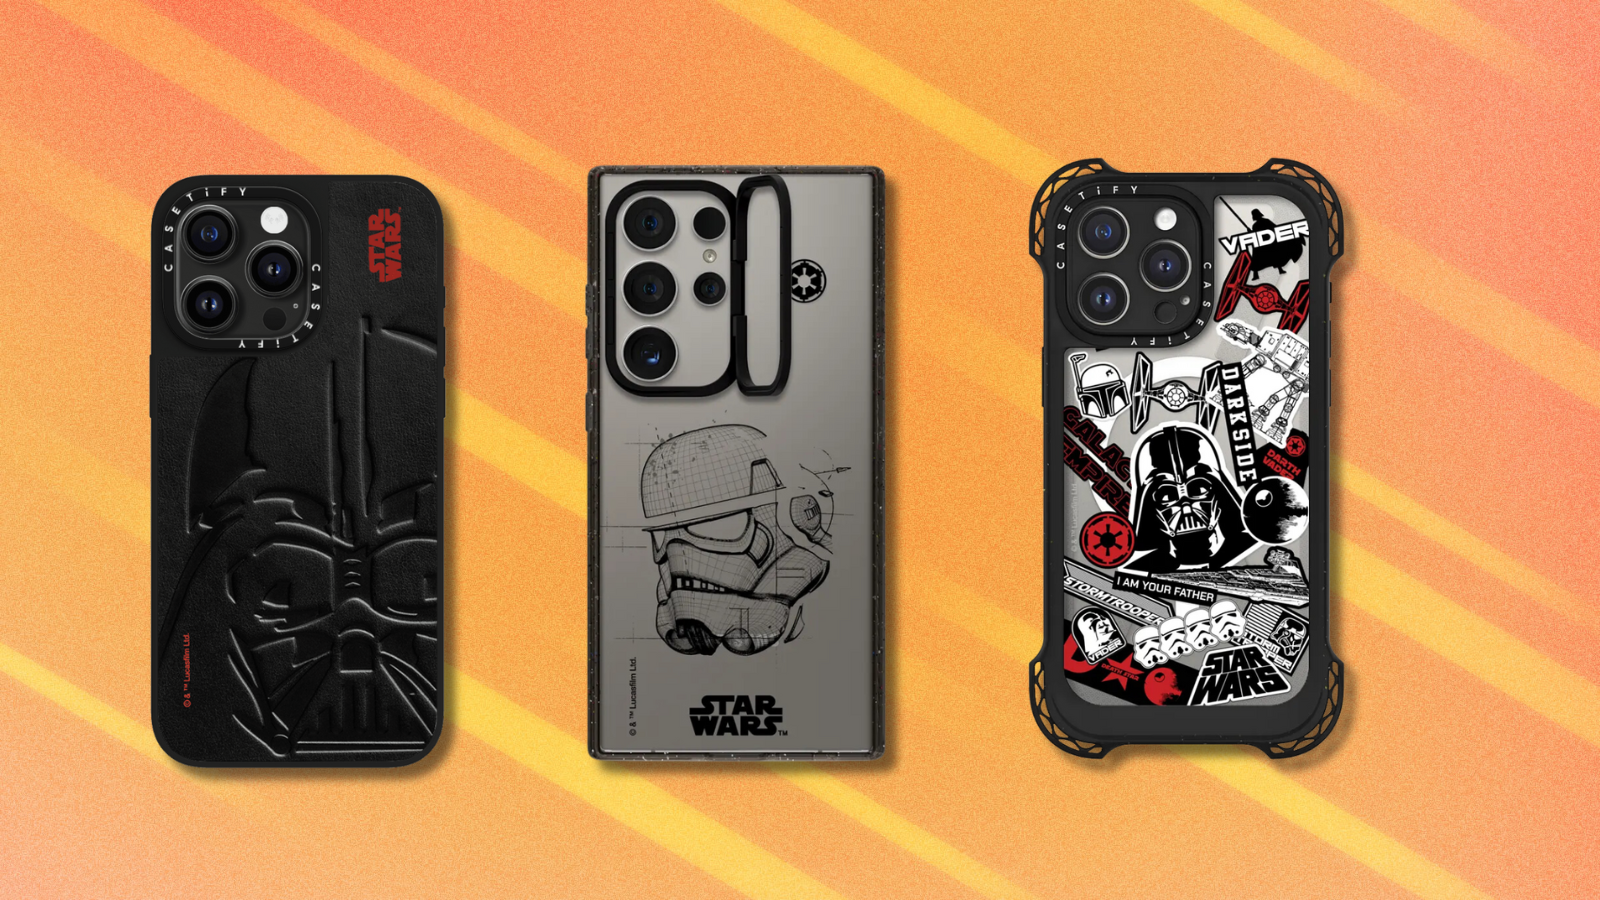 Star Wars and Casetify phone case designs on orange abstract background